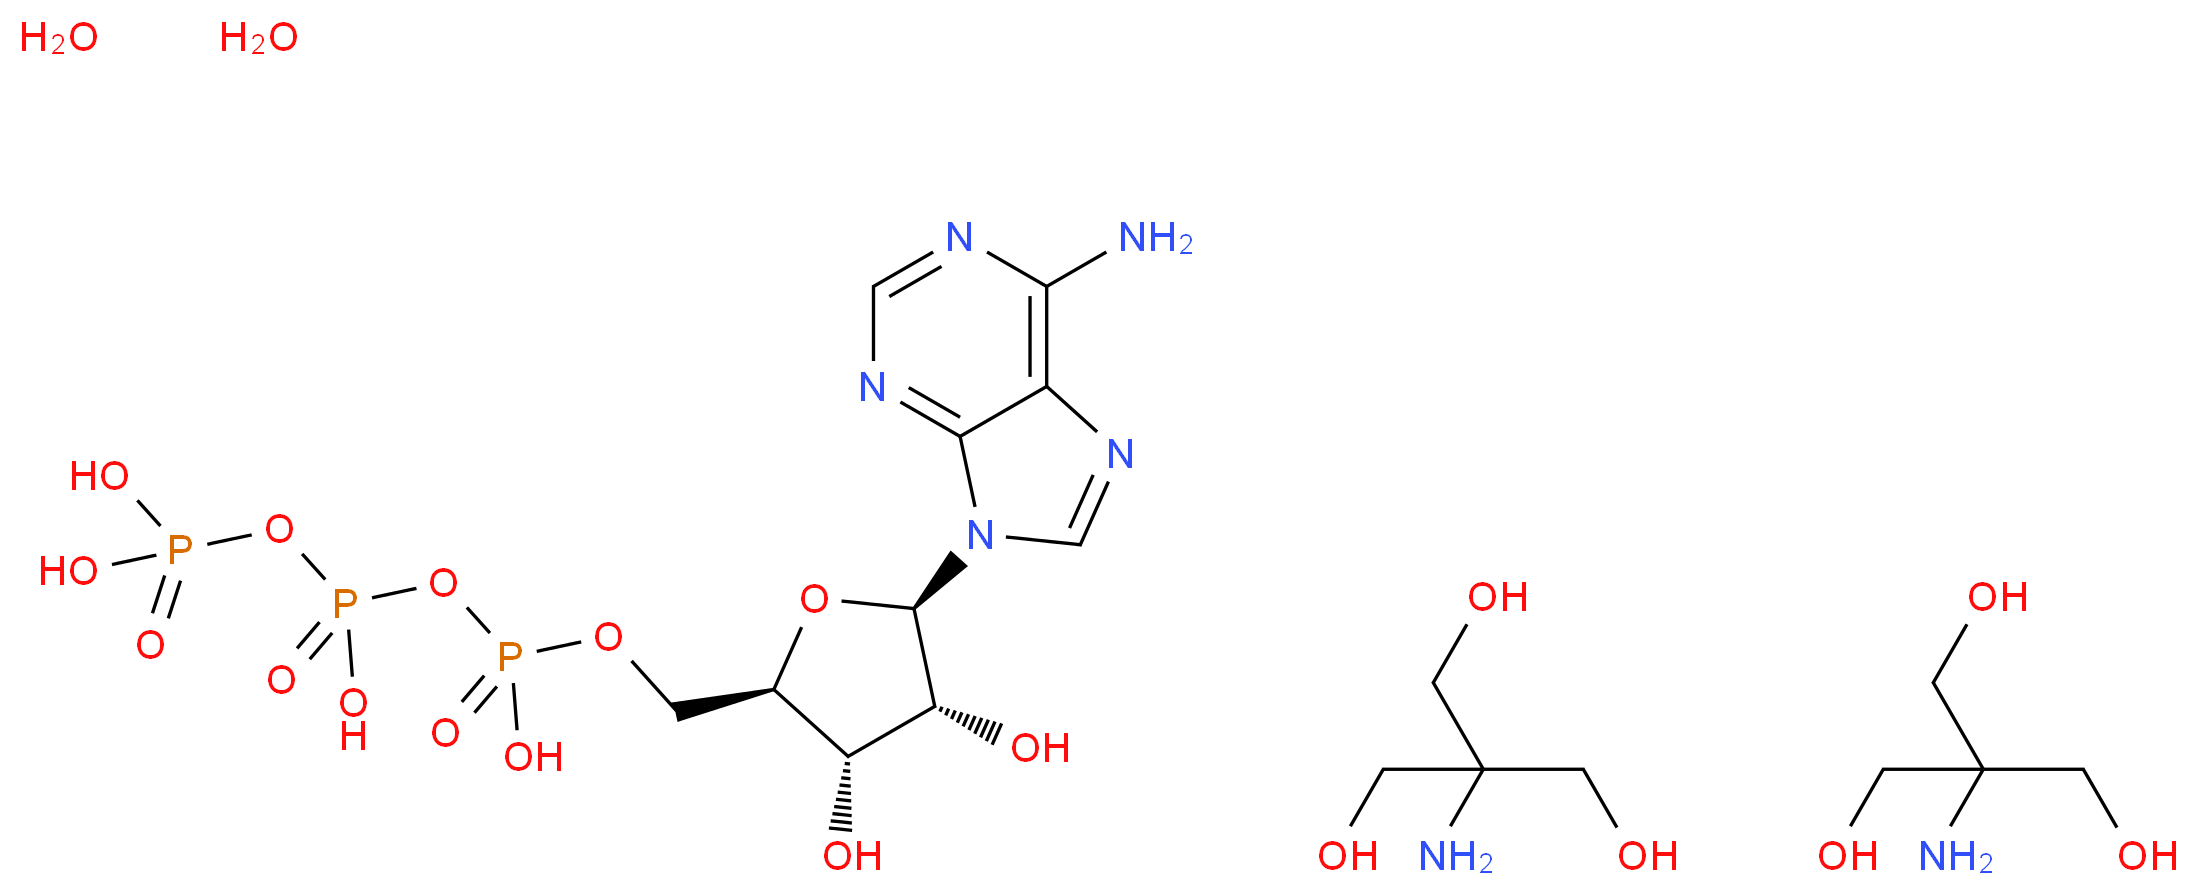 102047-34-7(anhydrous) molecular structure